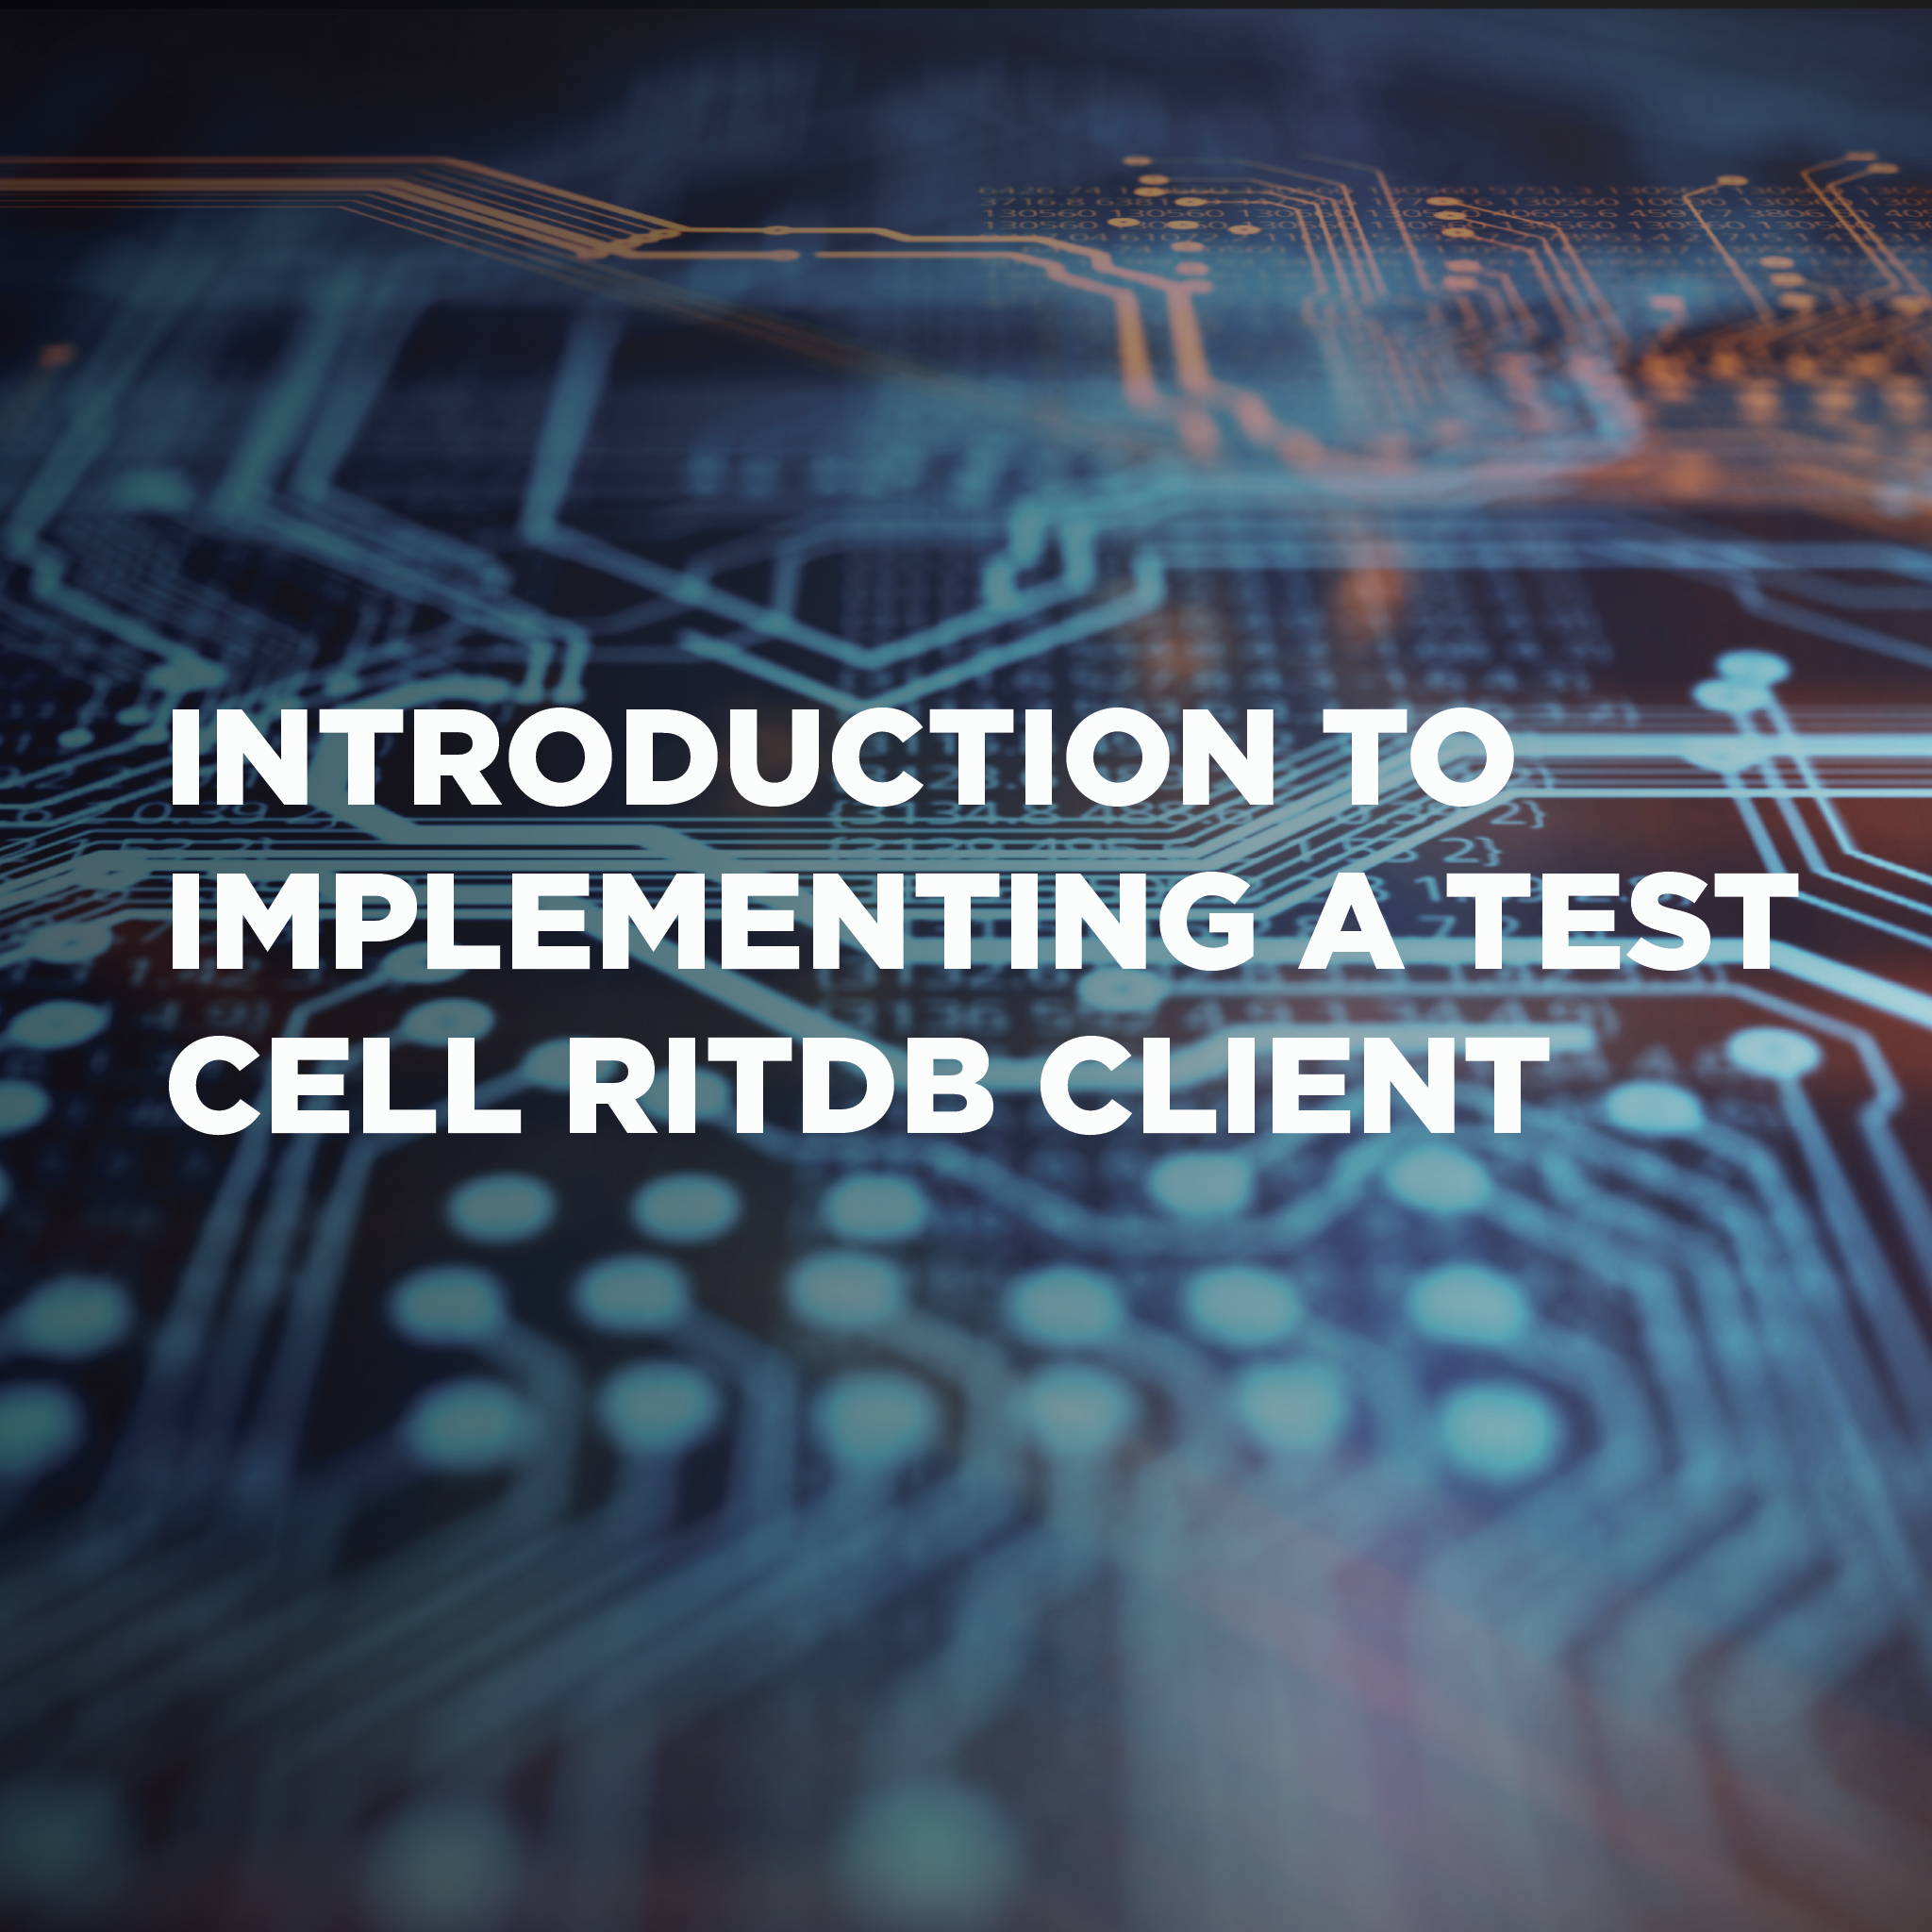 SEMI001 Introduction to Implementing a Test Cell RITdb Client